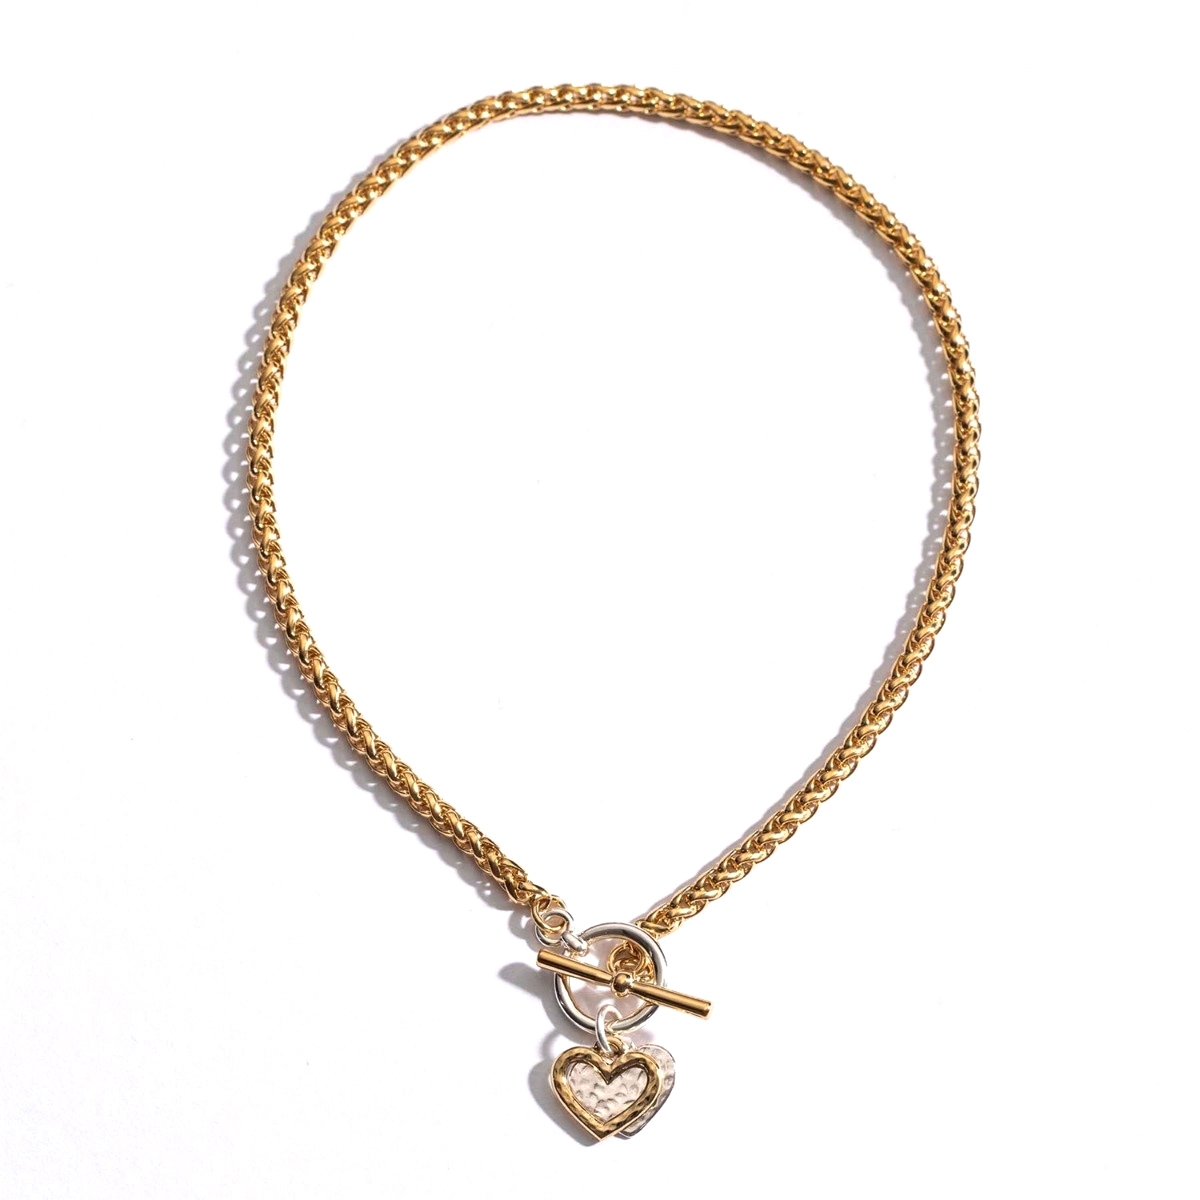 Danon Sterling Silver and 24K Gold-Plated Double Heart Necklace, Jewish  Jewelry